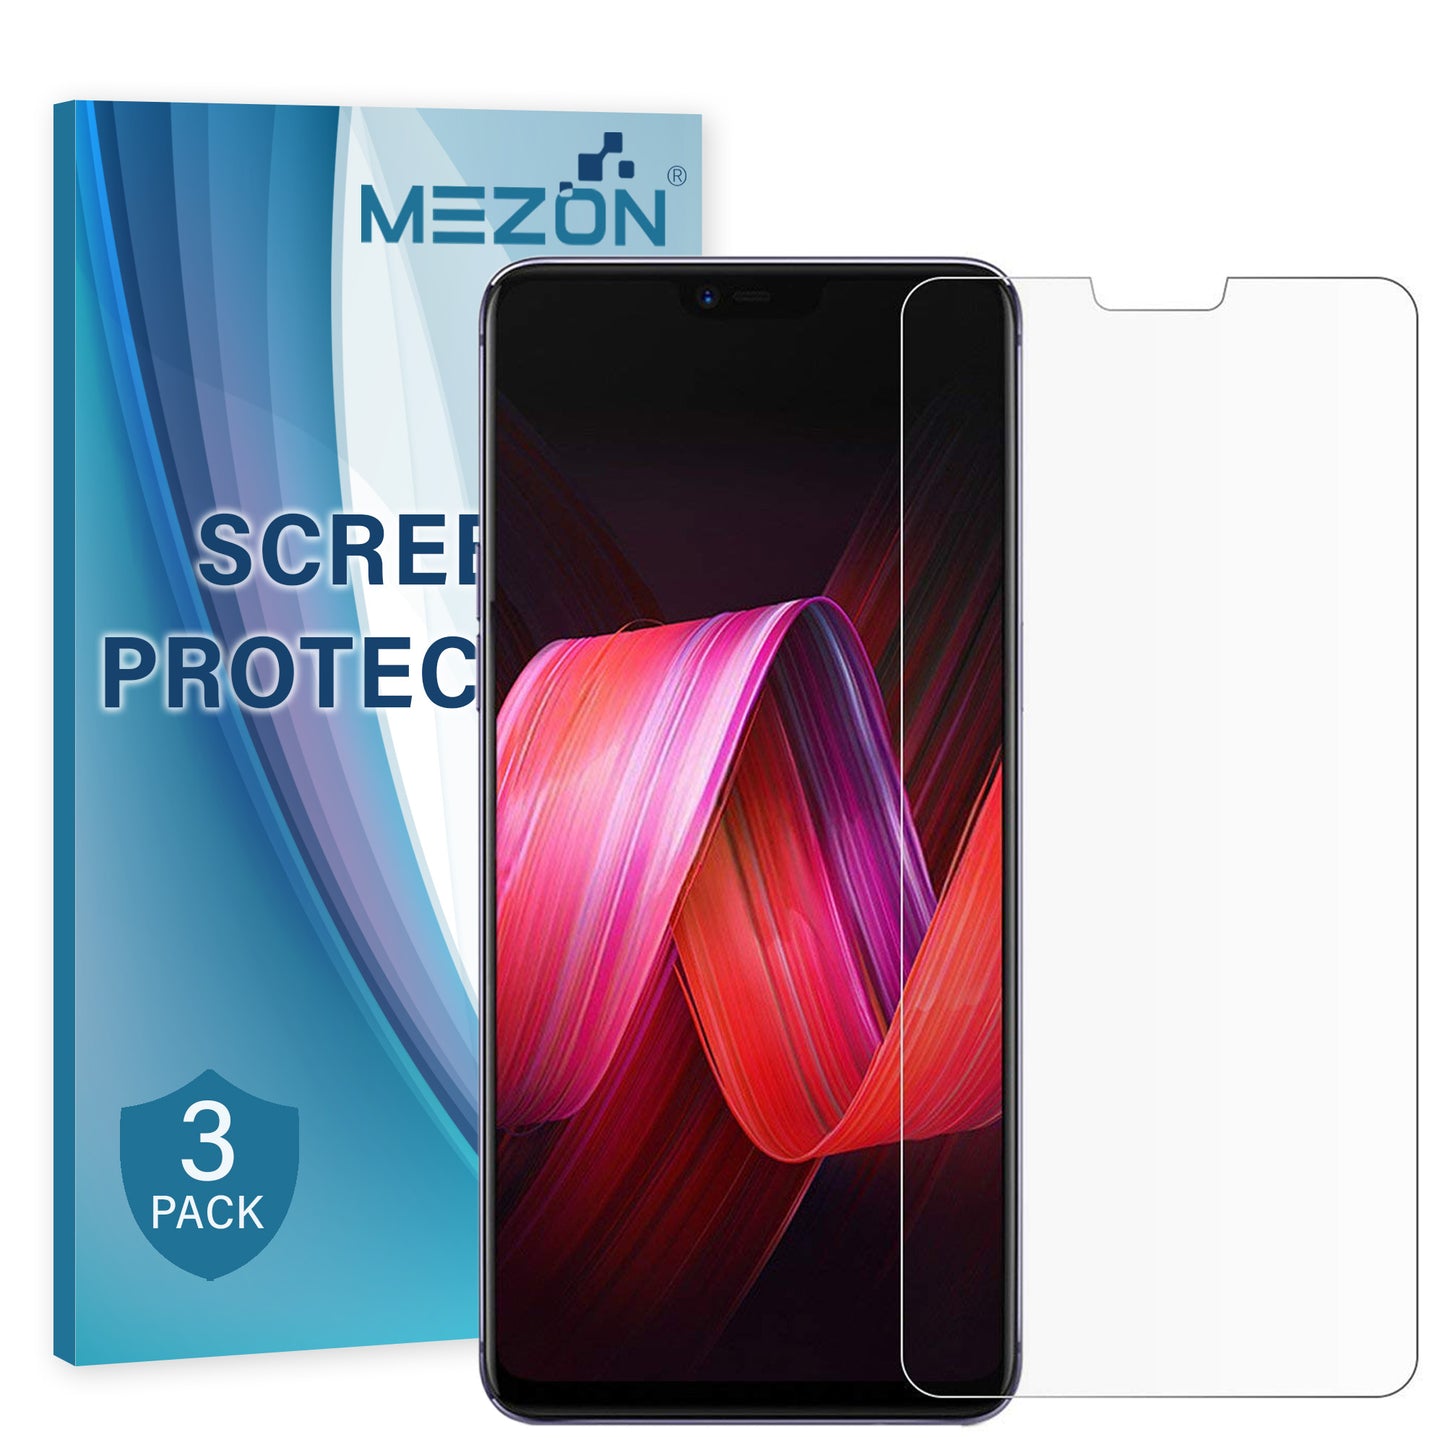 [3 Pack] MEZON OPPO R15 Ultra Clear Screen Protector Case Friendly Film (R15, Clear)